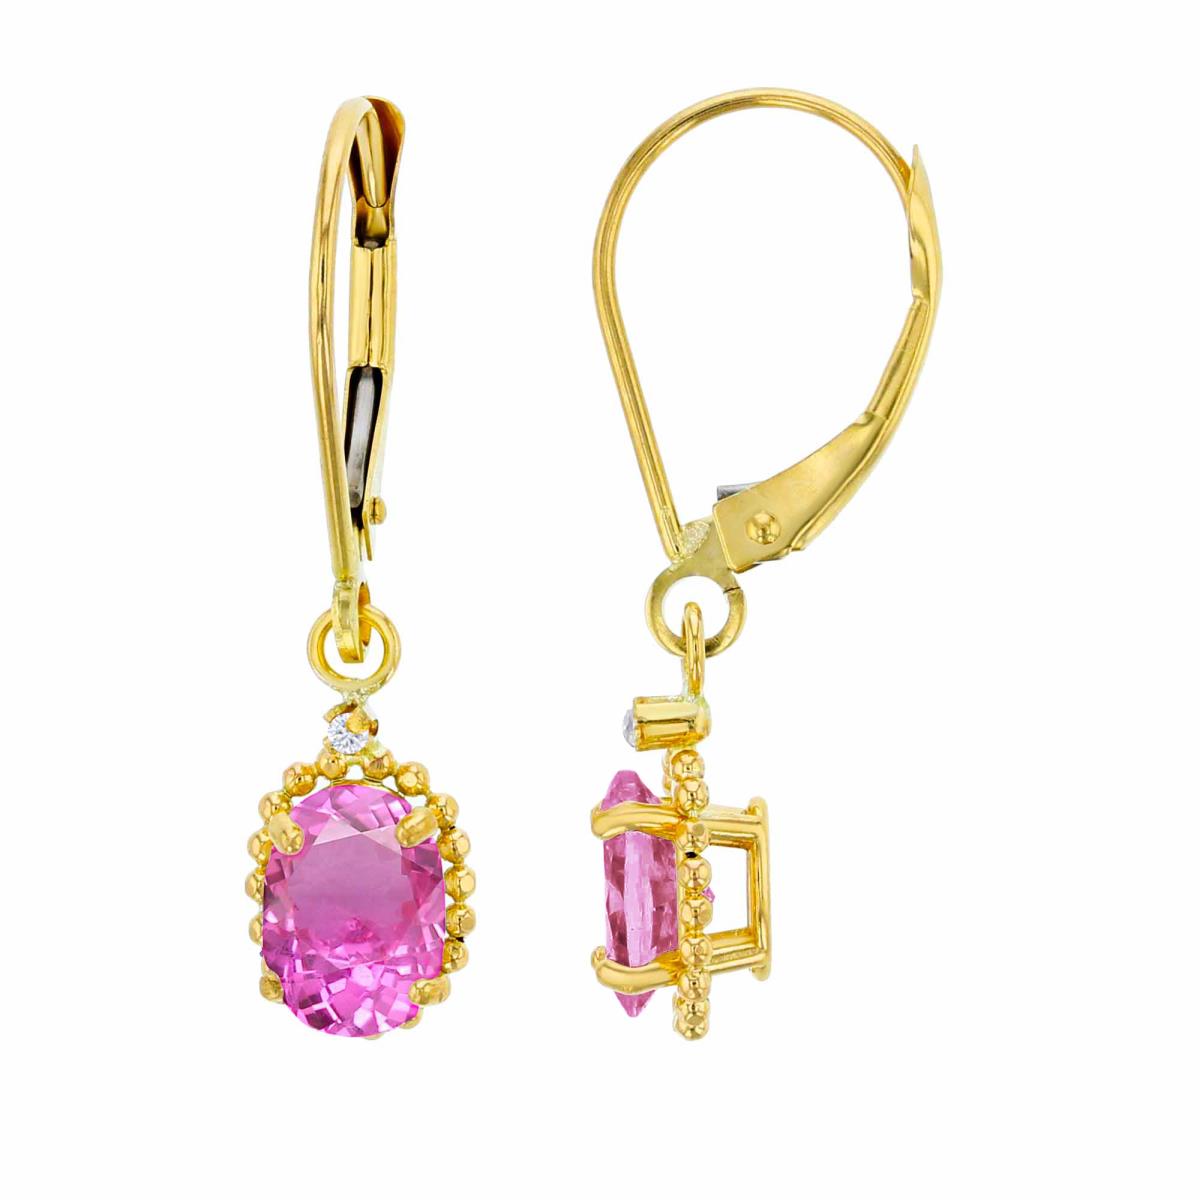 10K Yellow Gold 1.25mm Rd Created White Sapphire & 6x4mm Ov Created Pink Sapphire Bead Frame Drop Lever-Back Earring